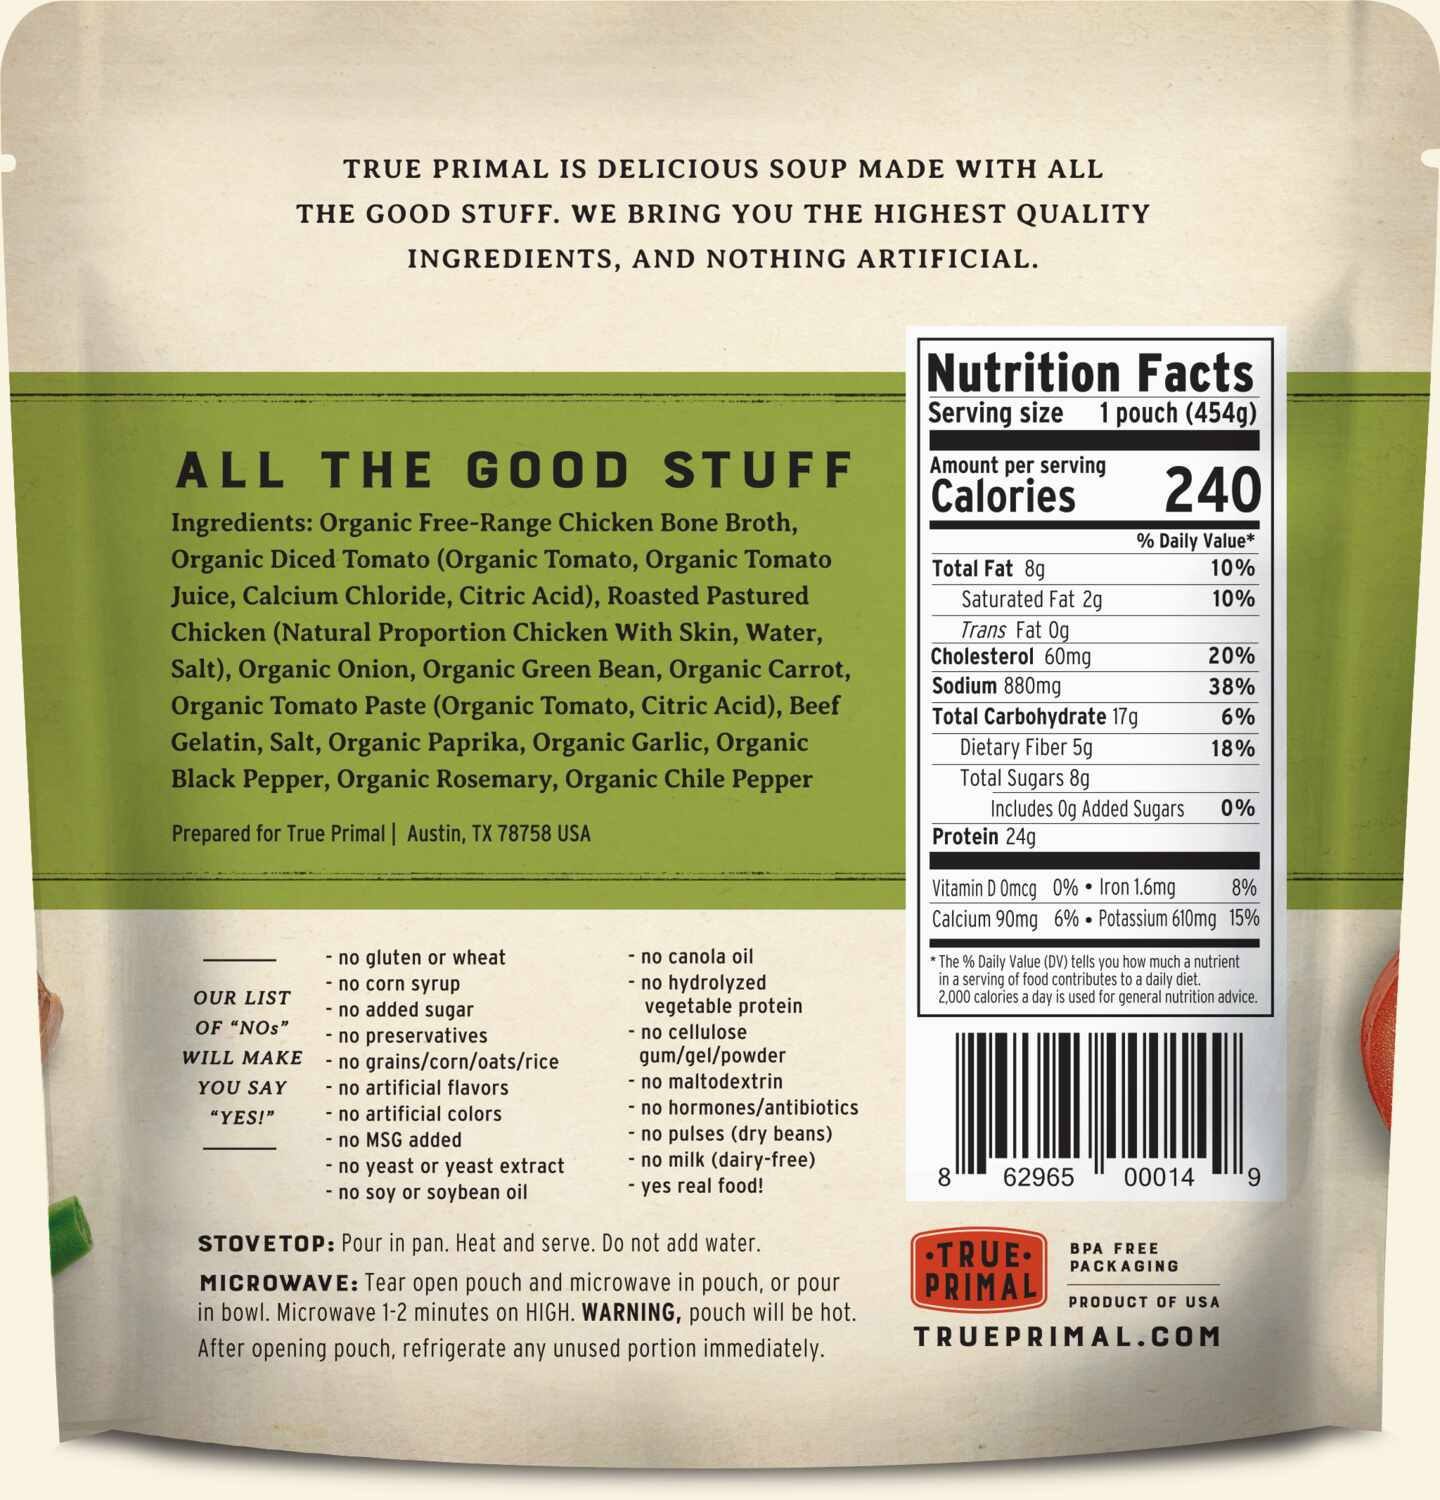 True Primal Chicken & Vegetable Soup in pouch, back of label. UPC: 862965000149.